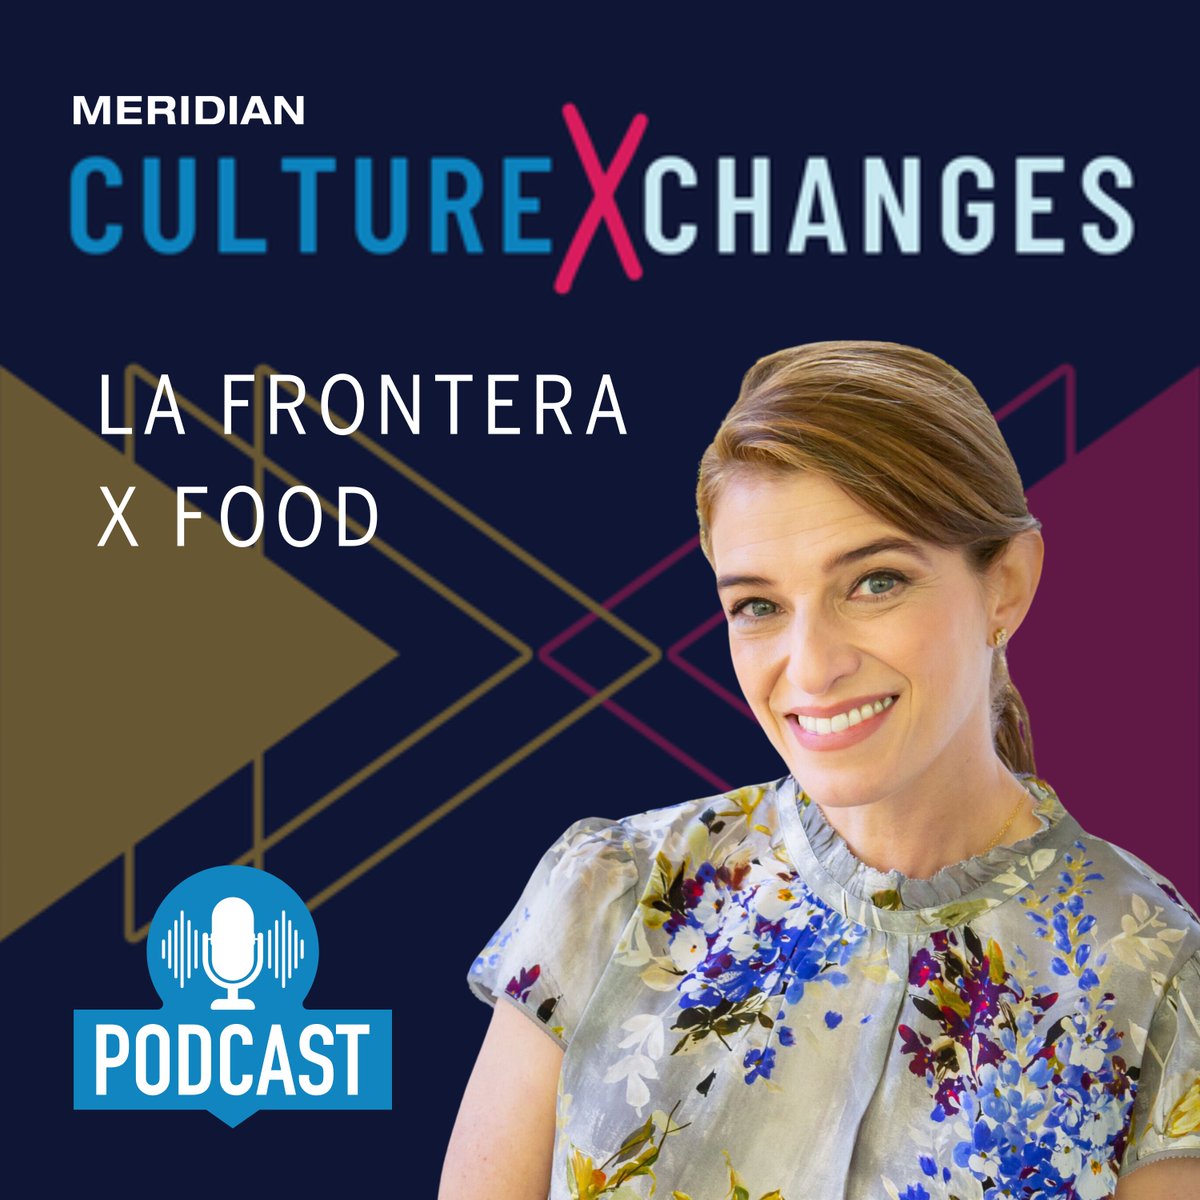 🎙️ Explore the delicious intersection of food and diplomacy in our latest episode of #CultureXChanges! Join @AMBSHolliday as he chats with Mexican Chef and TV host @PatiJinich about how cuisine bridges cultures and transcends boundaries. Listen now: meridian.org/project/cultur…